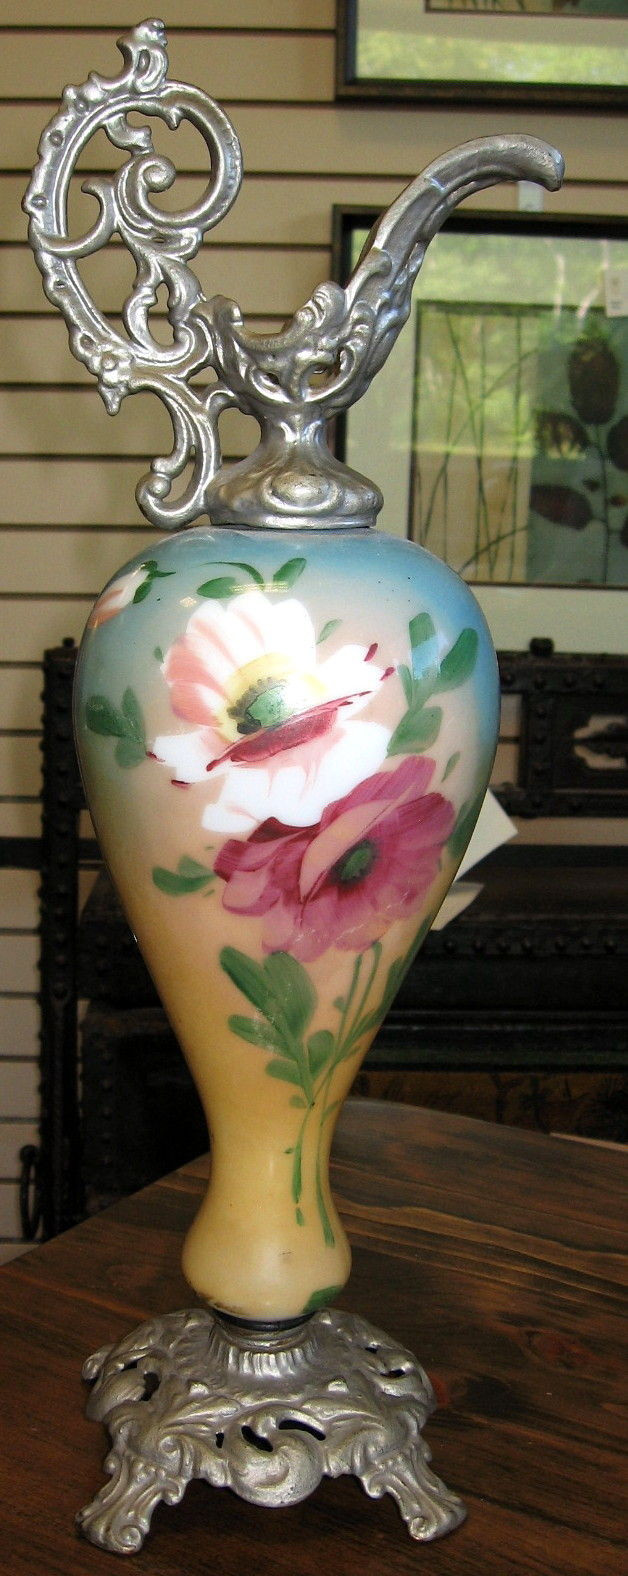 old oriental vases of antiques old cradle rocks at teaberry appraisals lifestyle in antiques old cradle rocks at teaberry appraisals lifestyle capemaycountyherald com